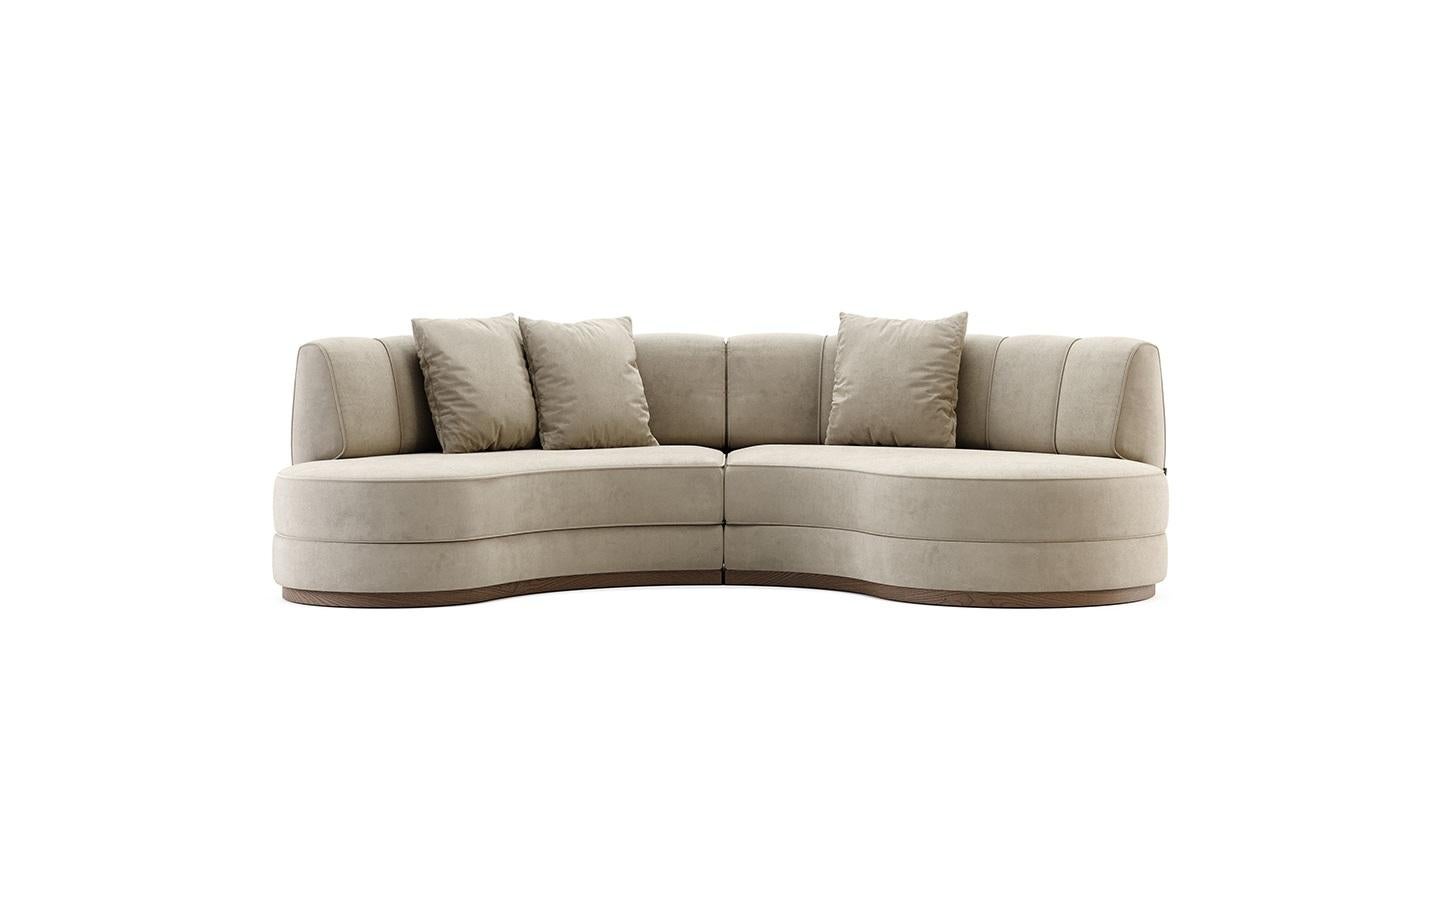 Mid-Century Modern inspired sectional sofa featuring curved design with luxurious light grey velvet fabric. Supported by walnut stained wood base.
The velvet suggested on this sofa is stain resistant and water repellent. This sofa is suitable for